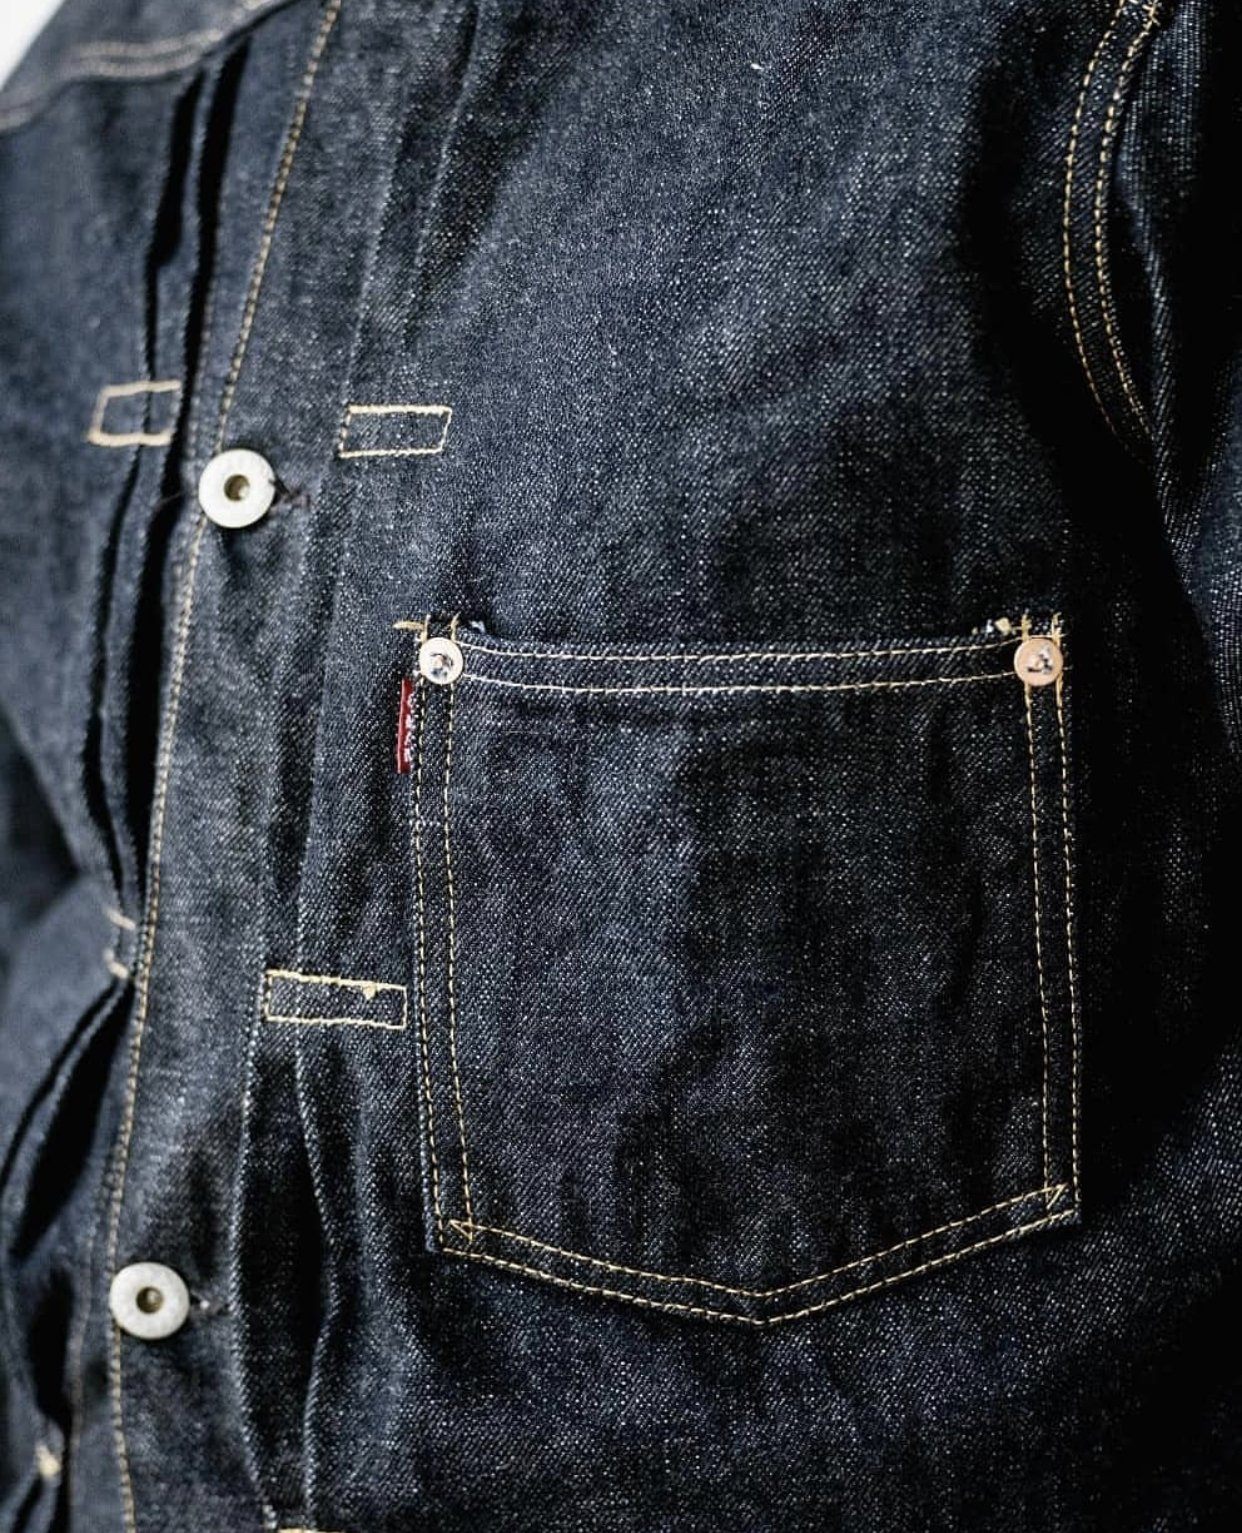 Conner's Sewing Factory + Cushman WWII Denim Jacket | 21506 - The Signet Store